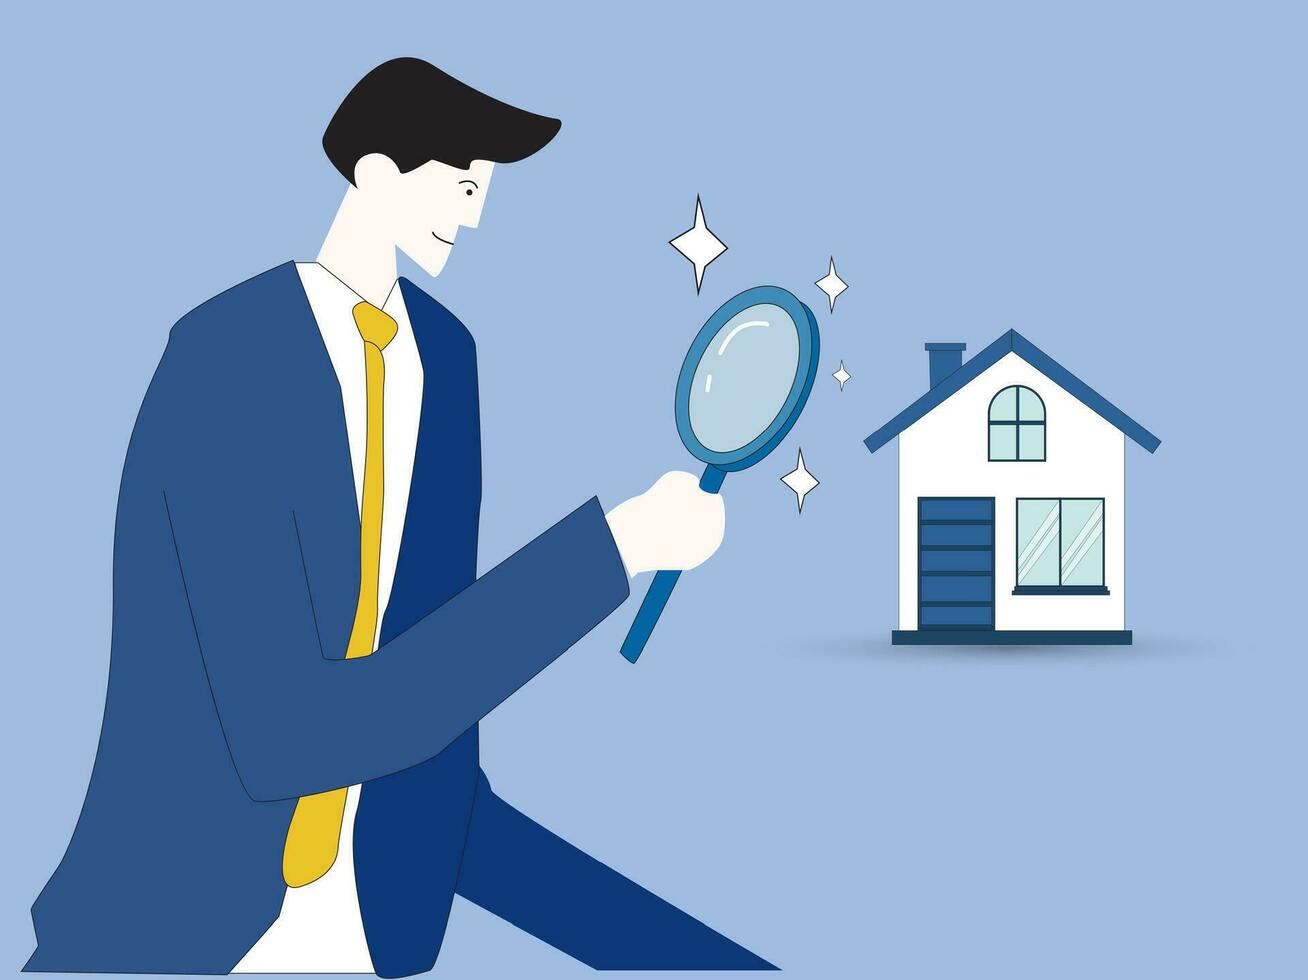 Searching for new house, look for real estate and accommodation valuation or new rent and mortgage concept, smart businessman using magnifying glass zooming to see house or residential details. vector